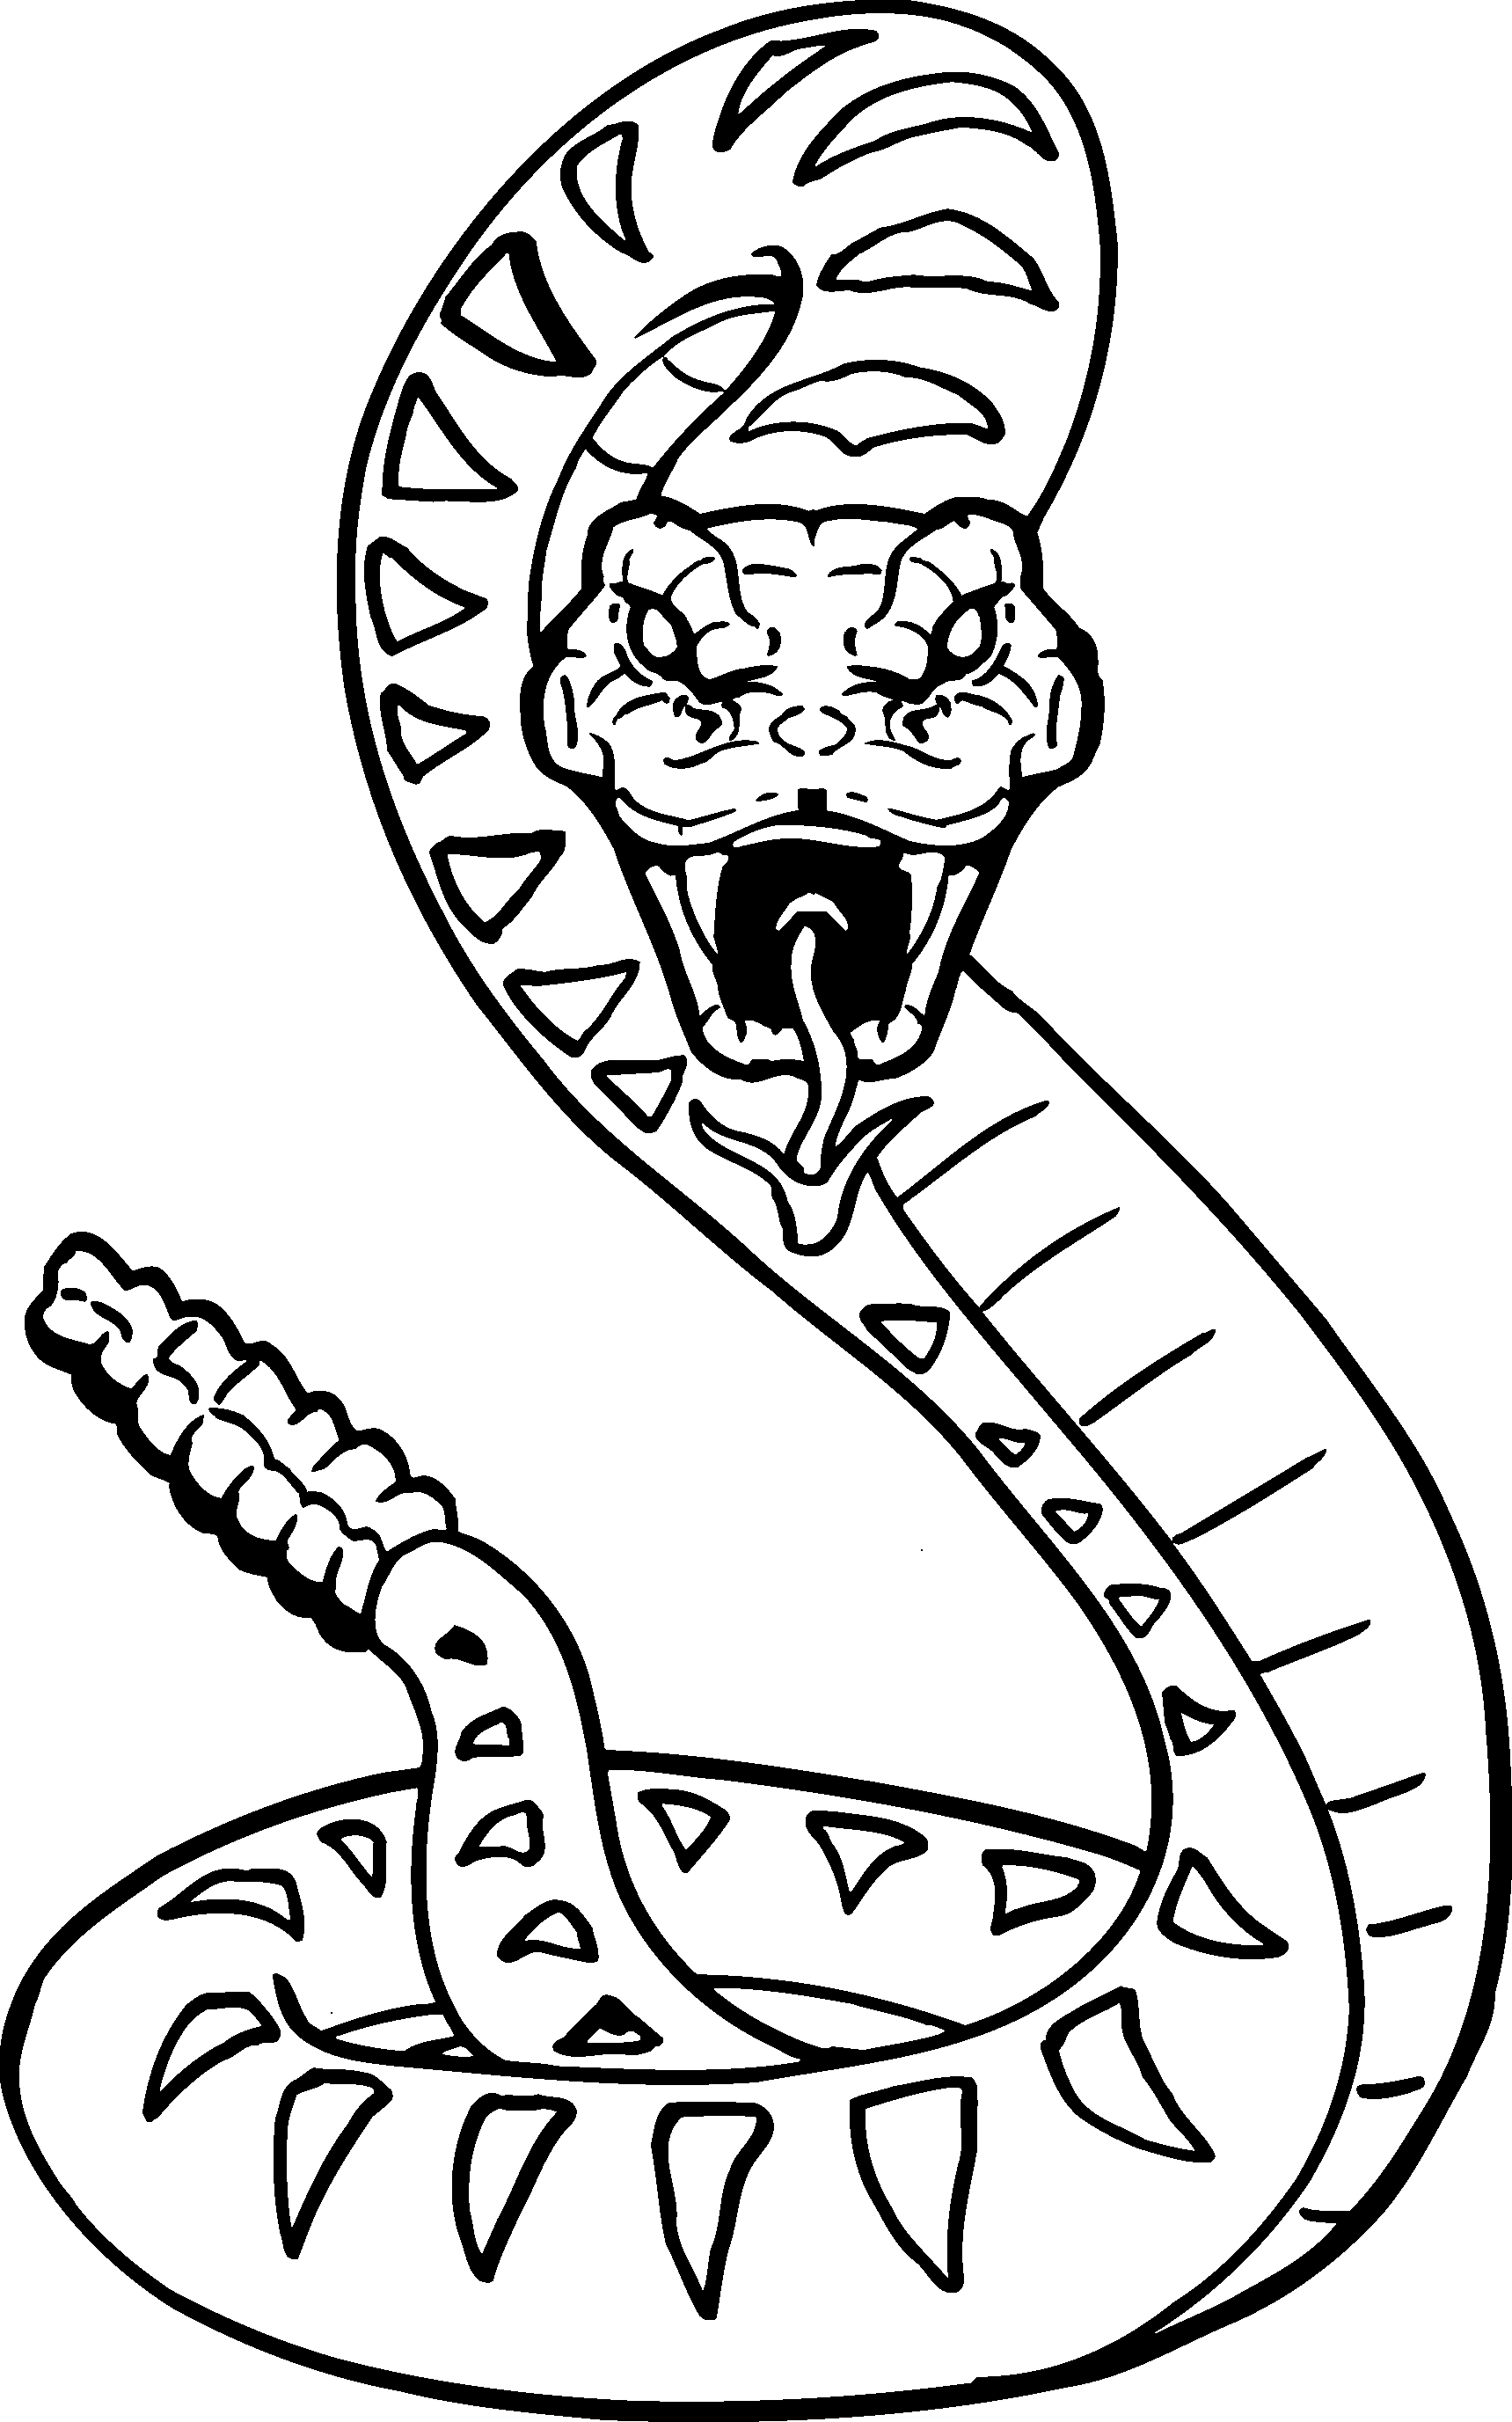 Snake Face Drawing - ClipArt Best